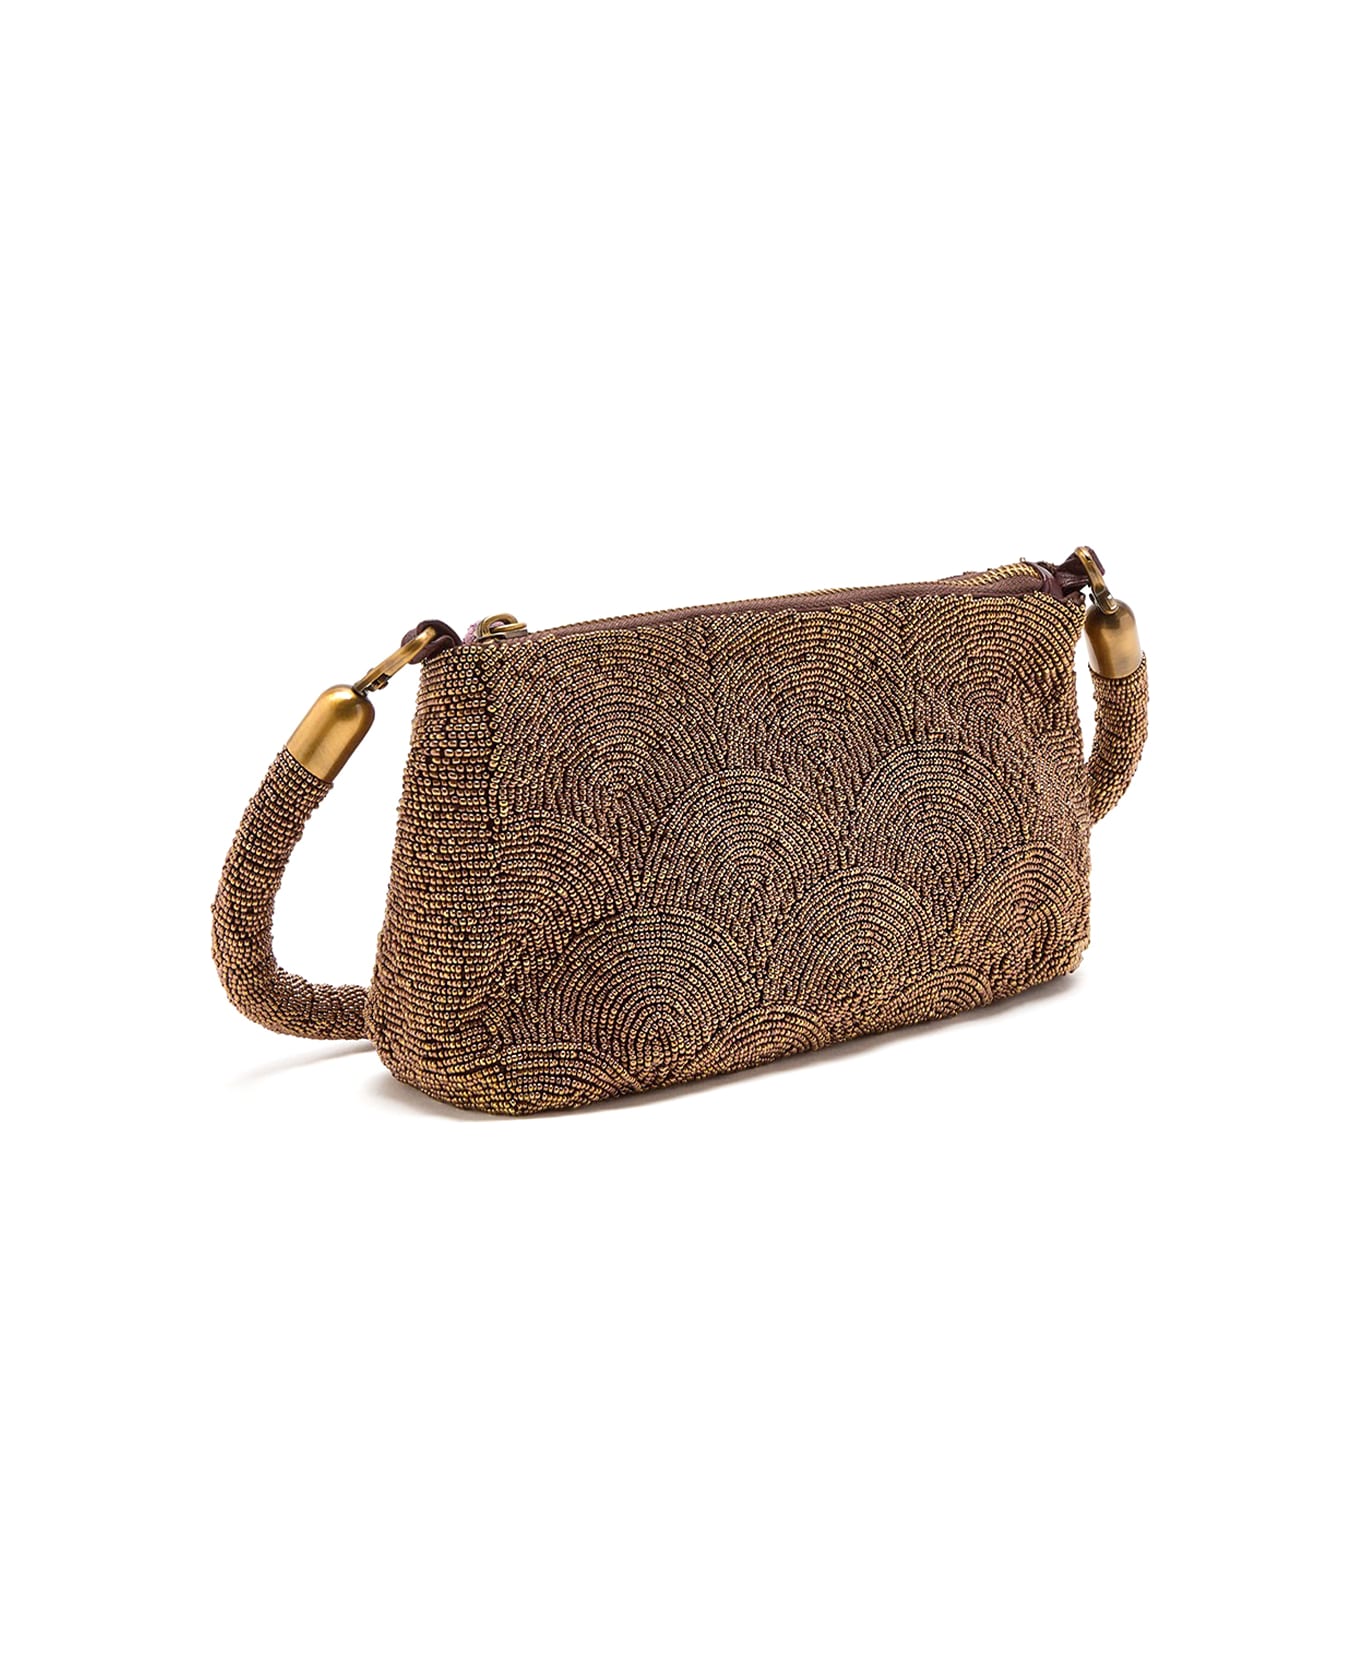 Malìparmi Shoulder Bag With Hand-embroidered Beads - BRONZO ショルダーバッグ